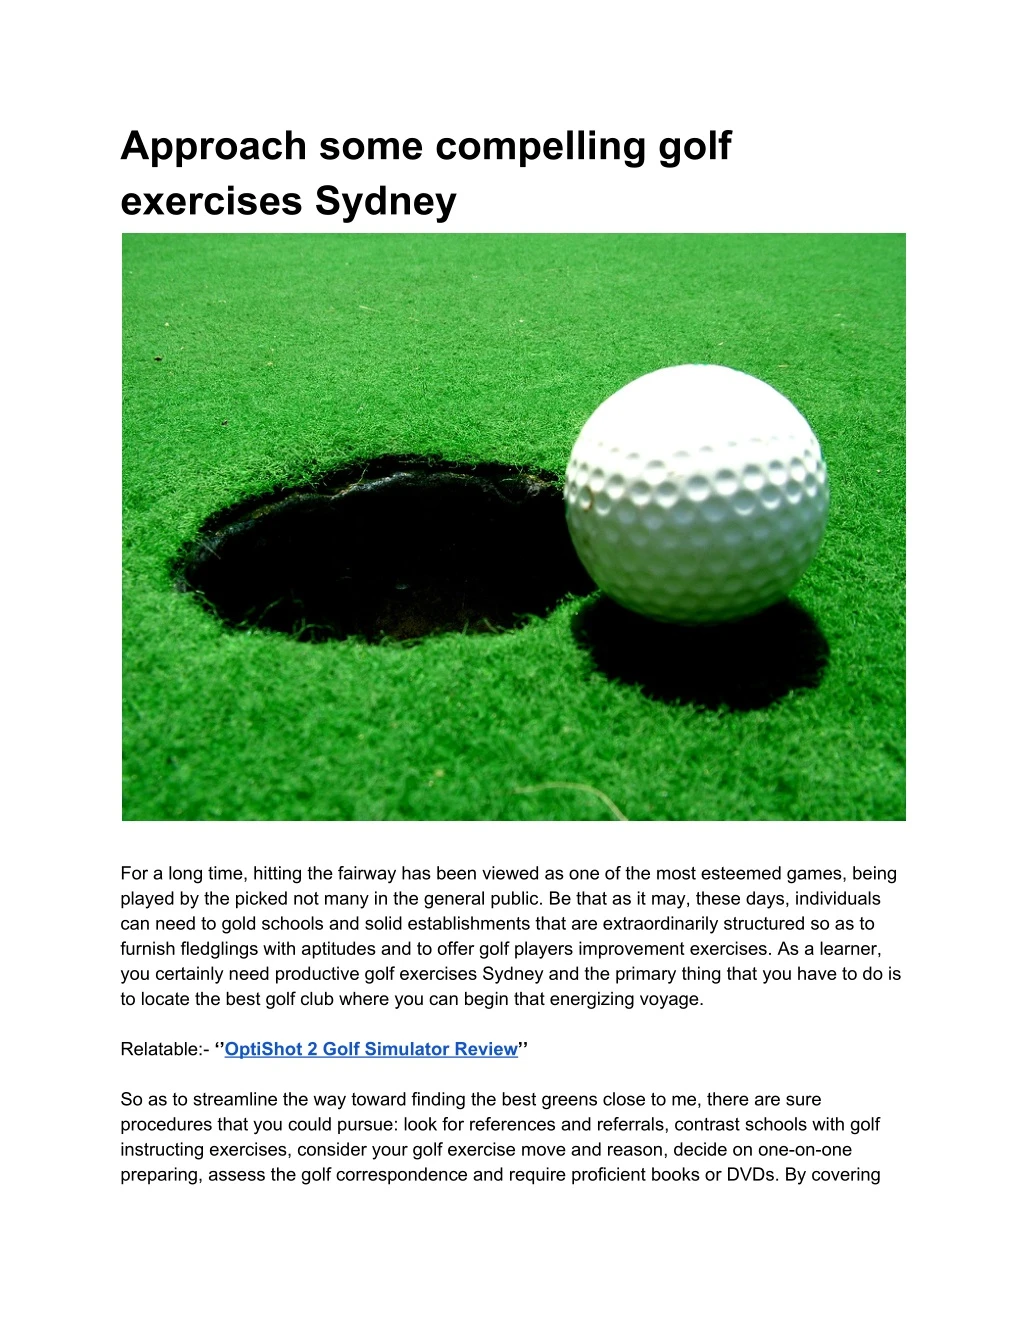 approach some compelling golf exercises sydney